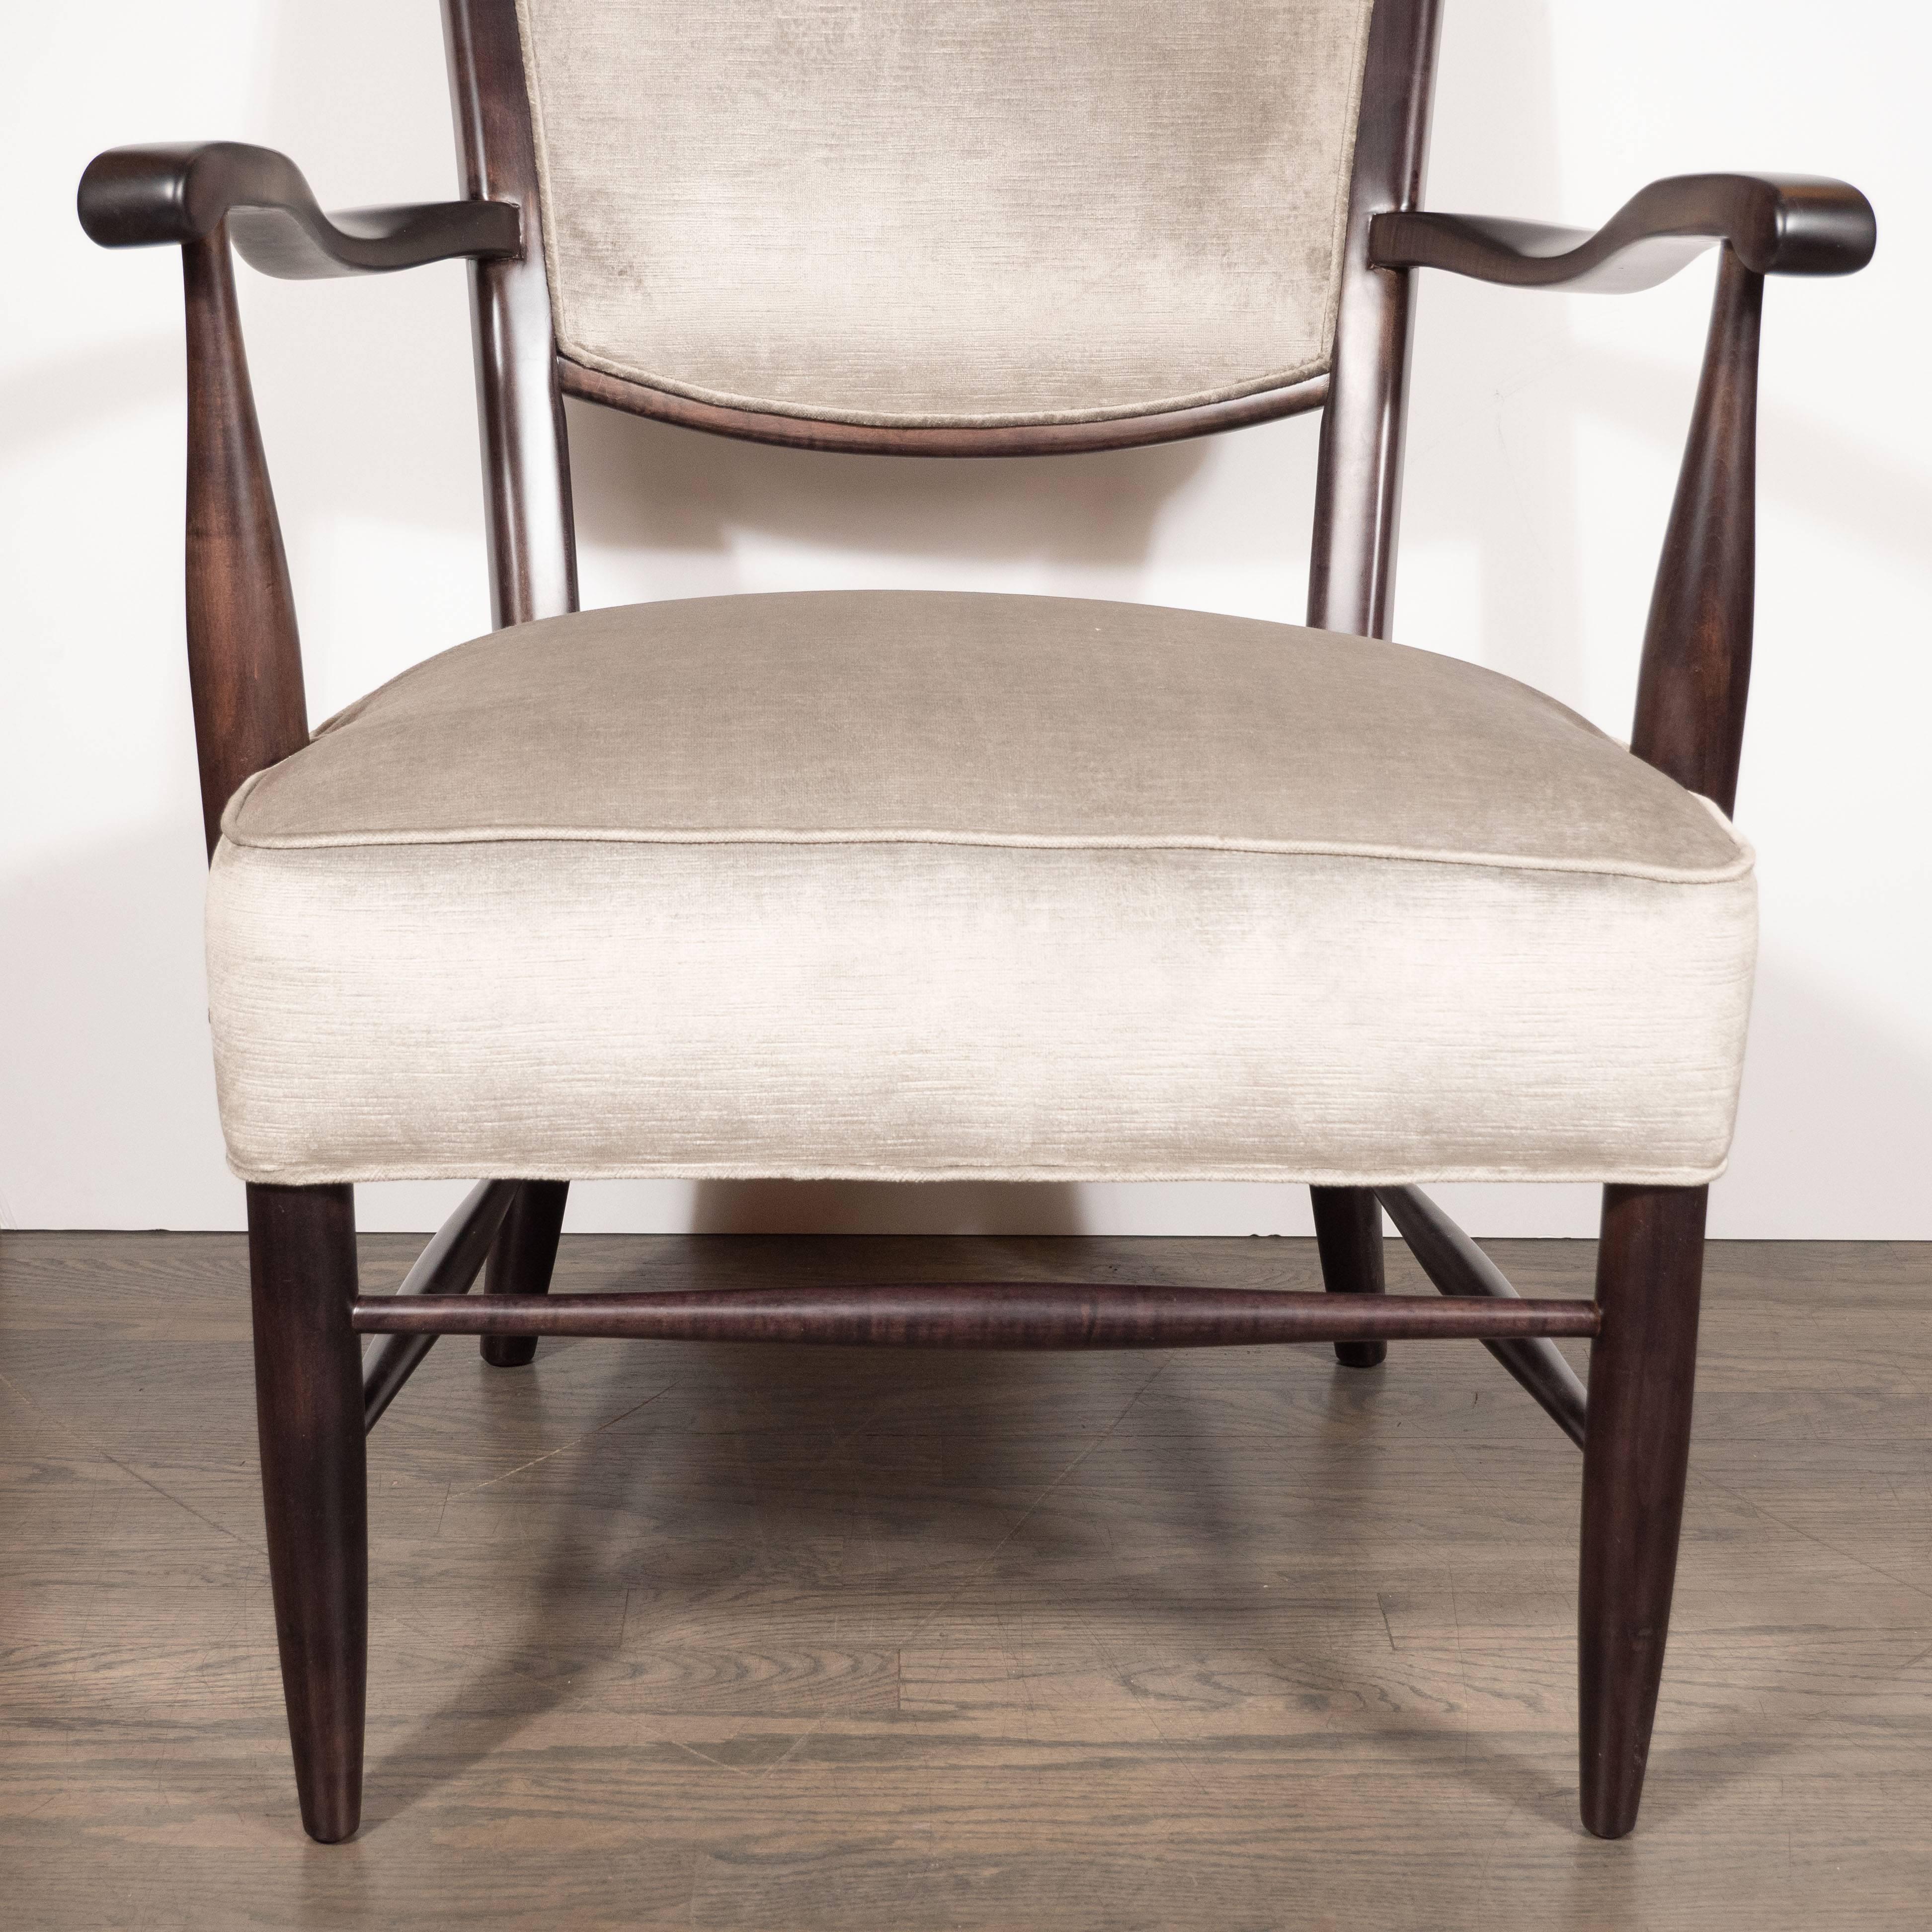 This elegant and sophisticated parsons chair was handmade in the United States by the esteemed maker Maxwell Royal, circa 1960. It features a gently undulating back with stiles that taper into ears that ascend above the top rail. Additionally, it